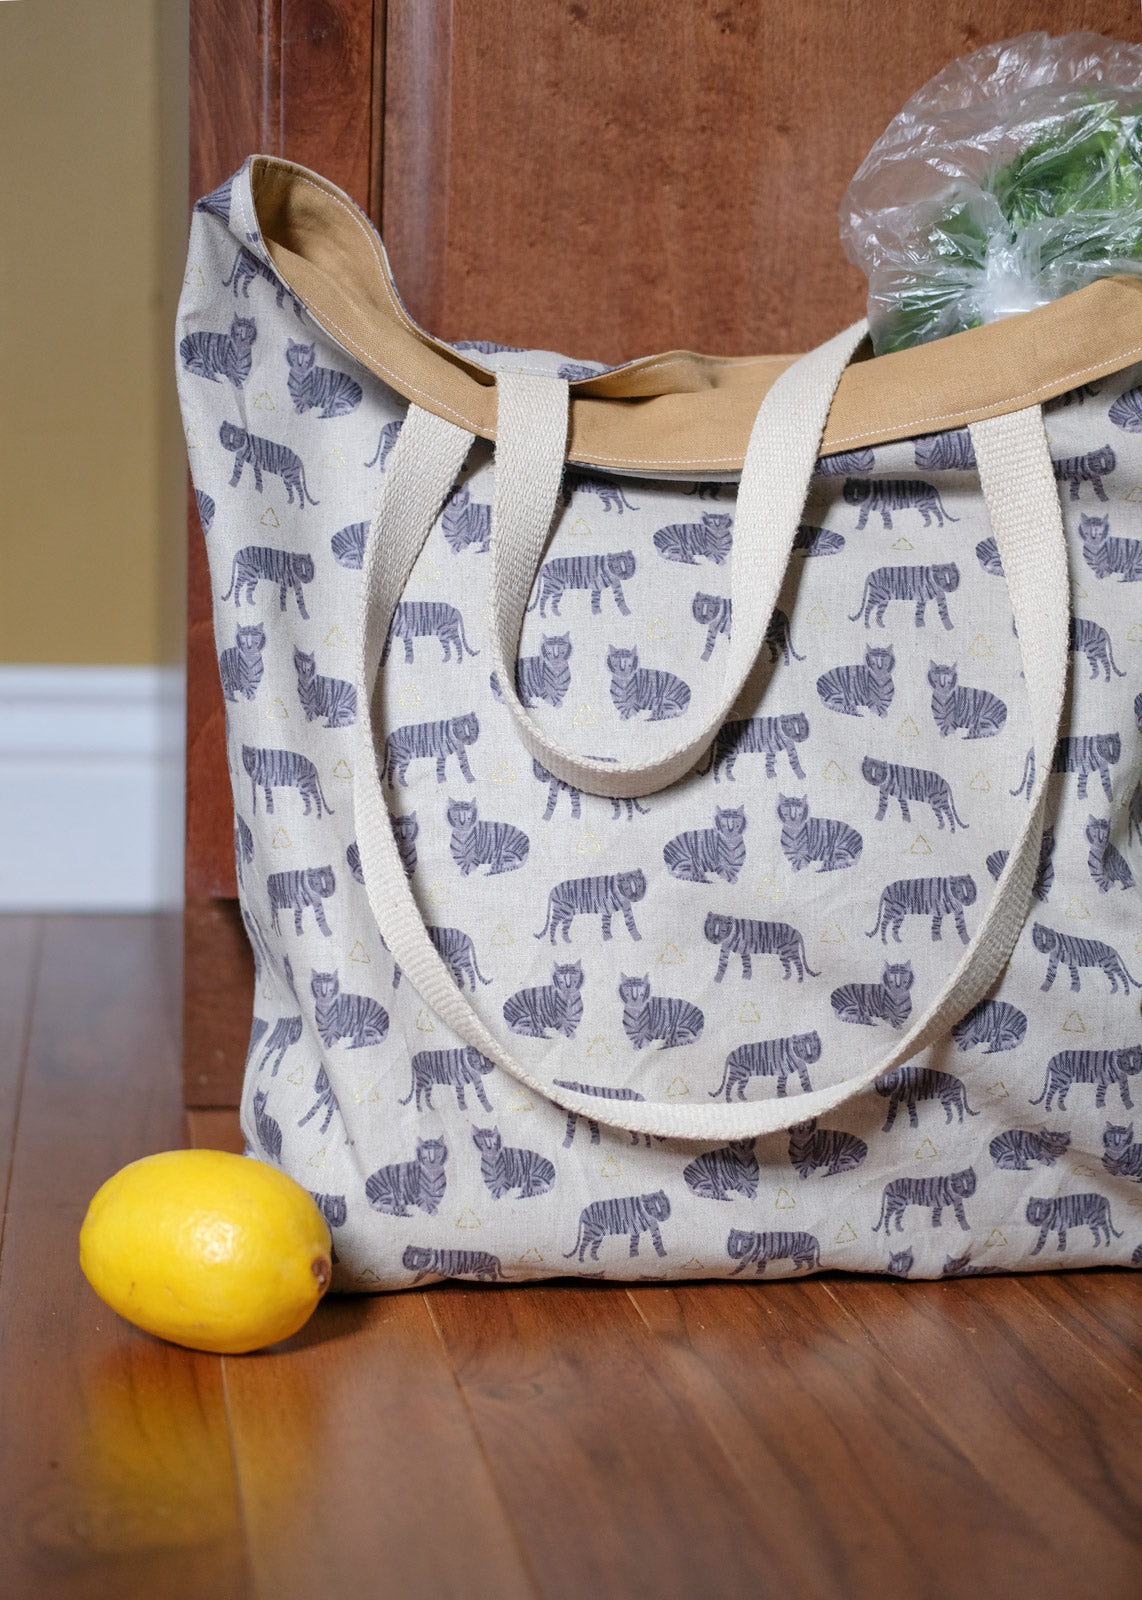 Fancy Tiger Crafts Market Tote sitting on the floor with a lemon in front